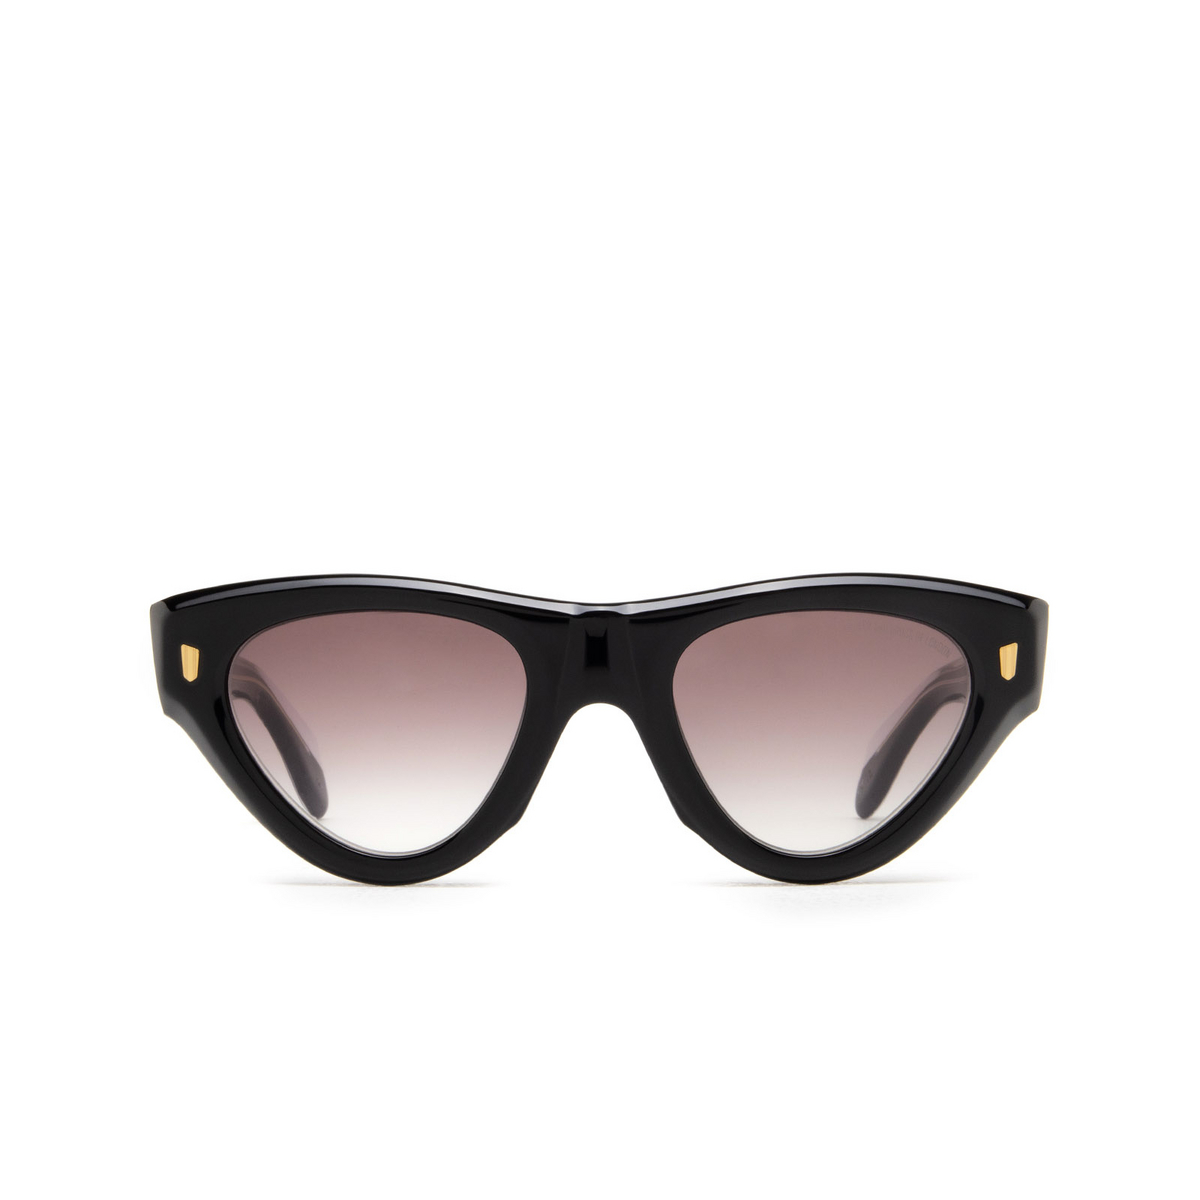 Cutler and Gross 9926 Sunglasses 01 Black - front view